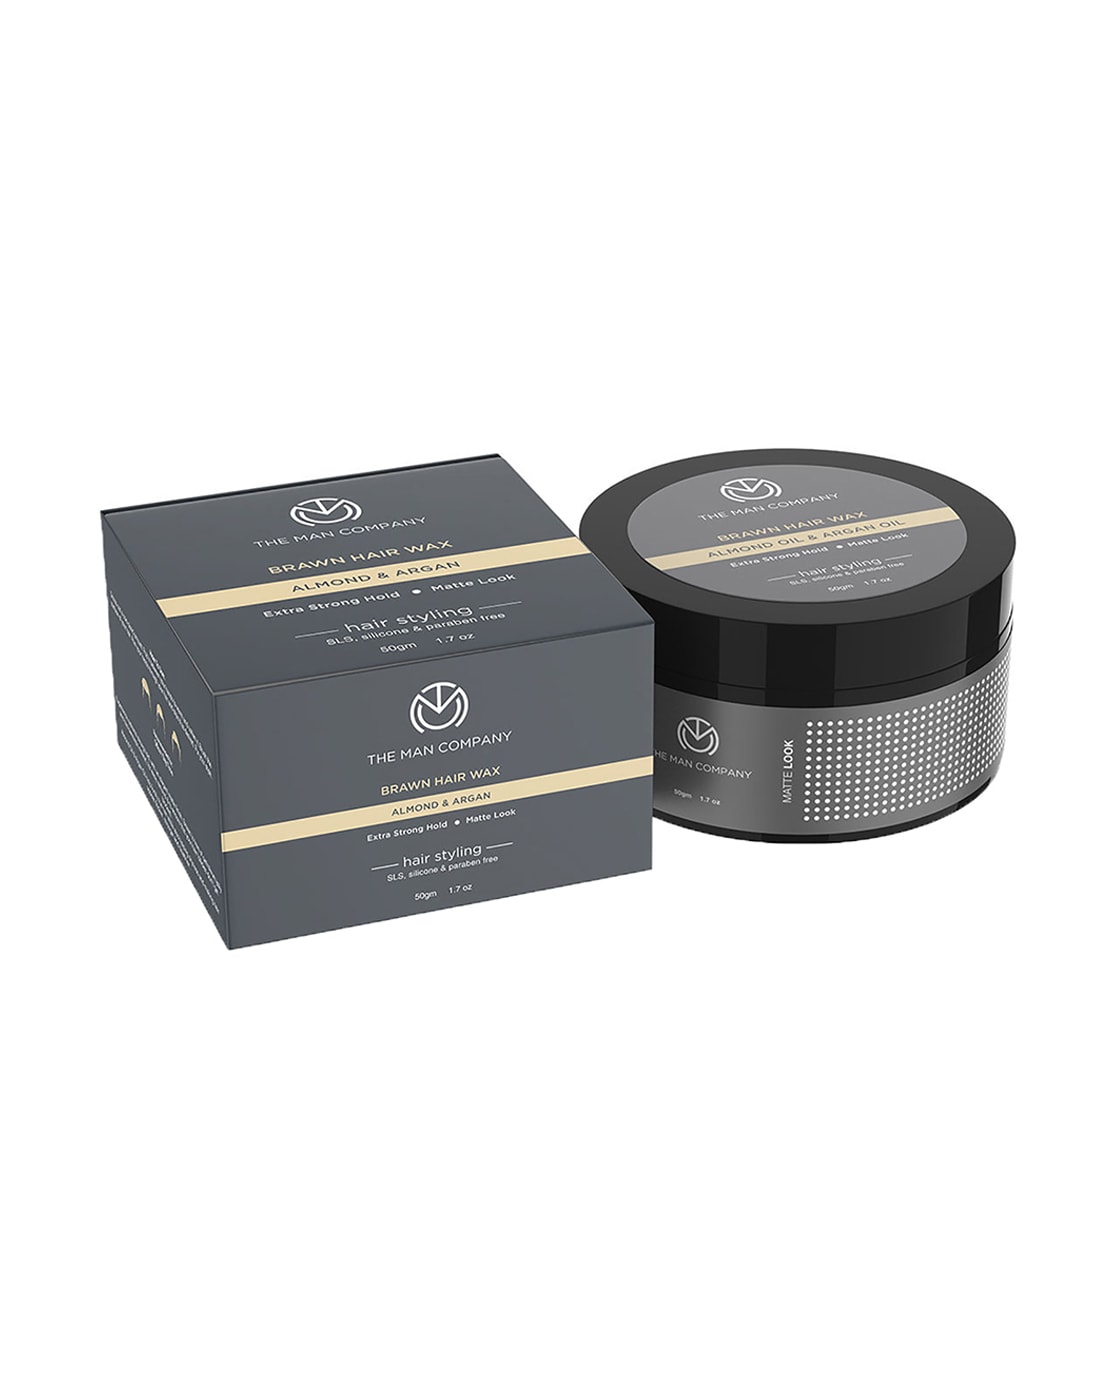 THE MAN COMPANY Hair Volumizing Powder Wax - Pack of 2 | Strong Hold, Matte  Finish & Non Greasy Hair Powder Price in India, Full Specifications &  Offers | DTashion.com